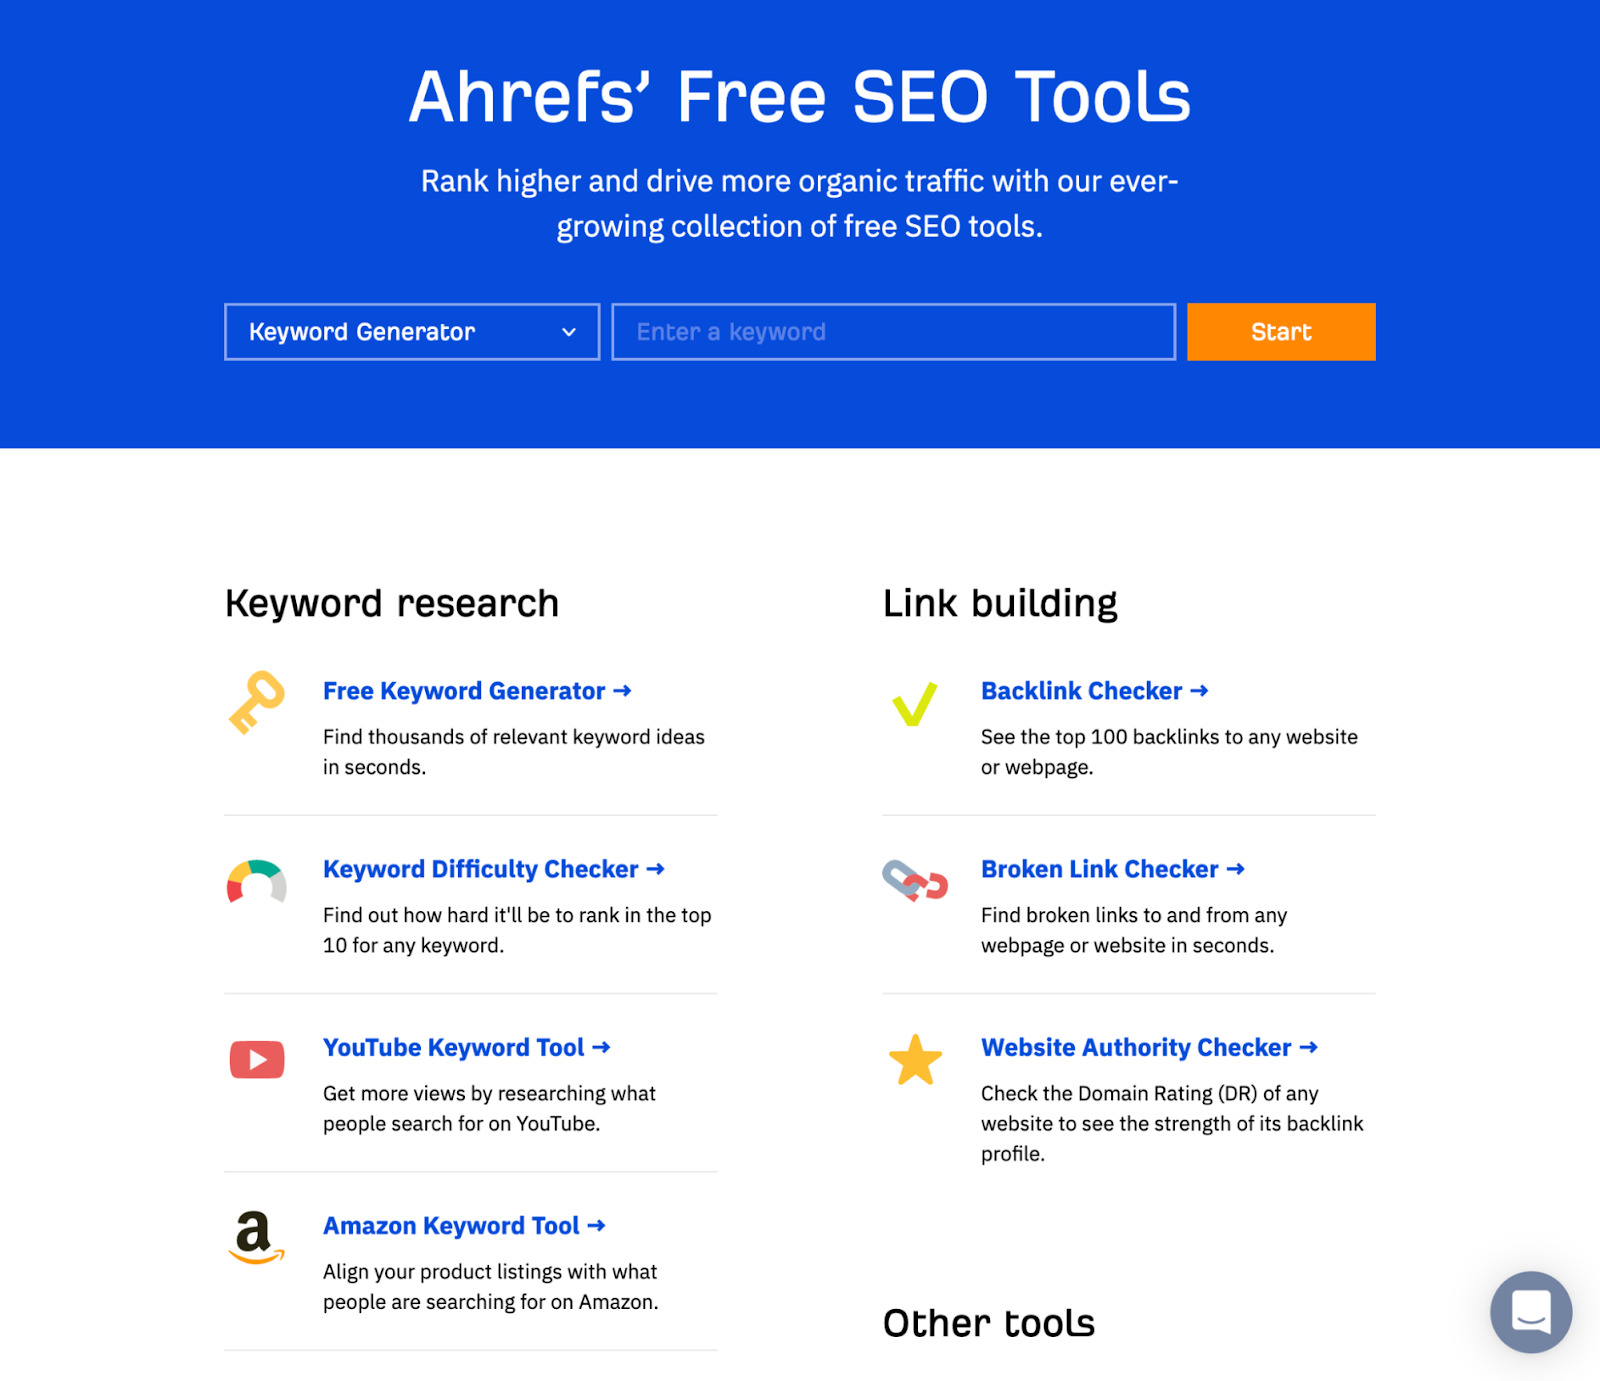 Excerpt of page showing Ahrefs' free tools for keyword research and link building